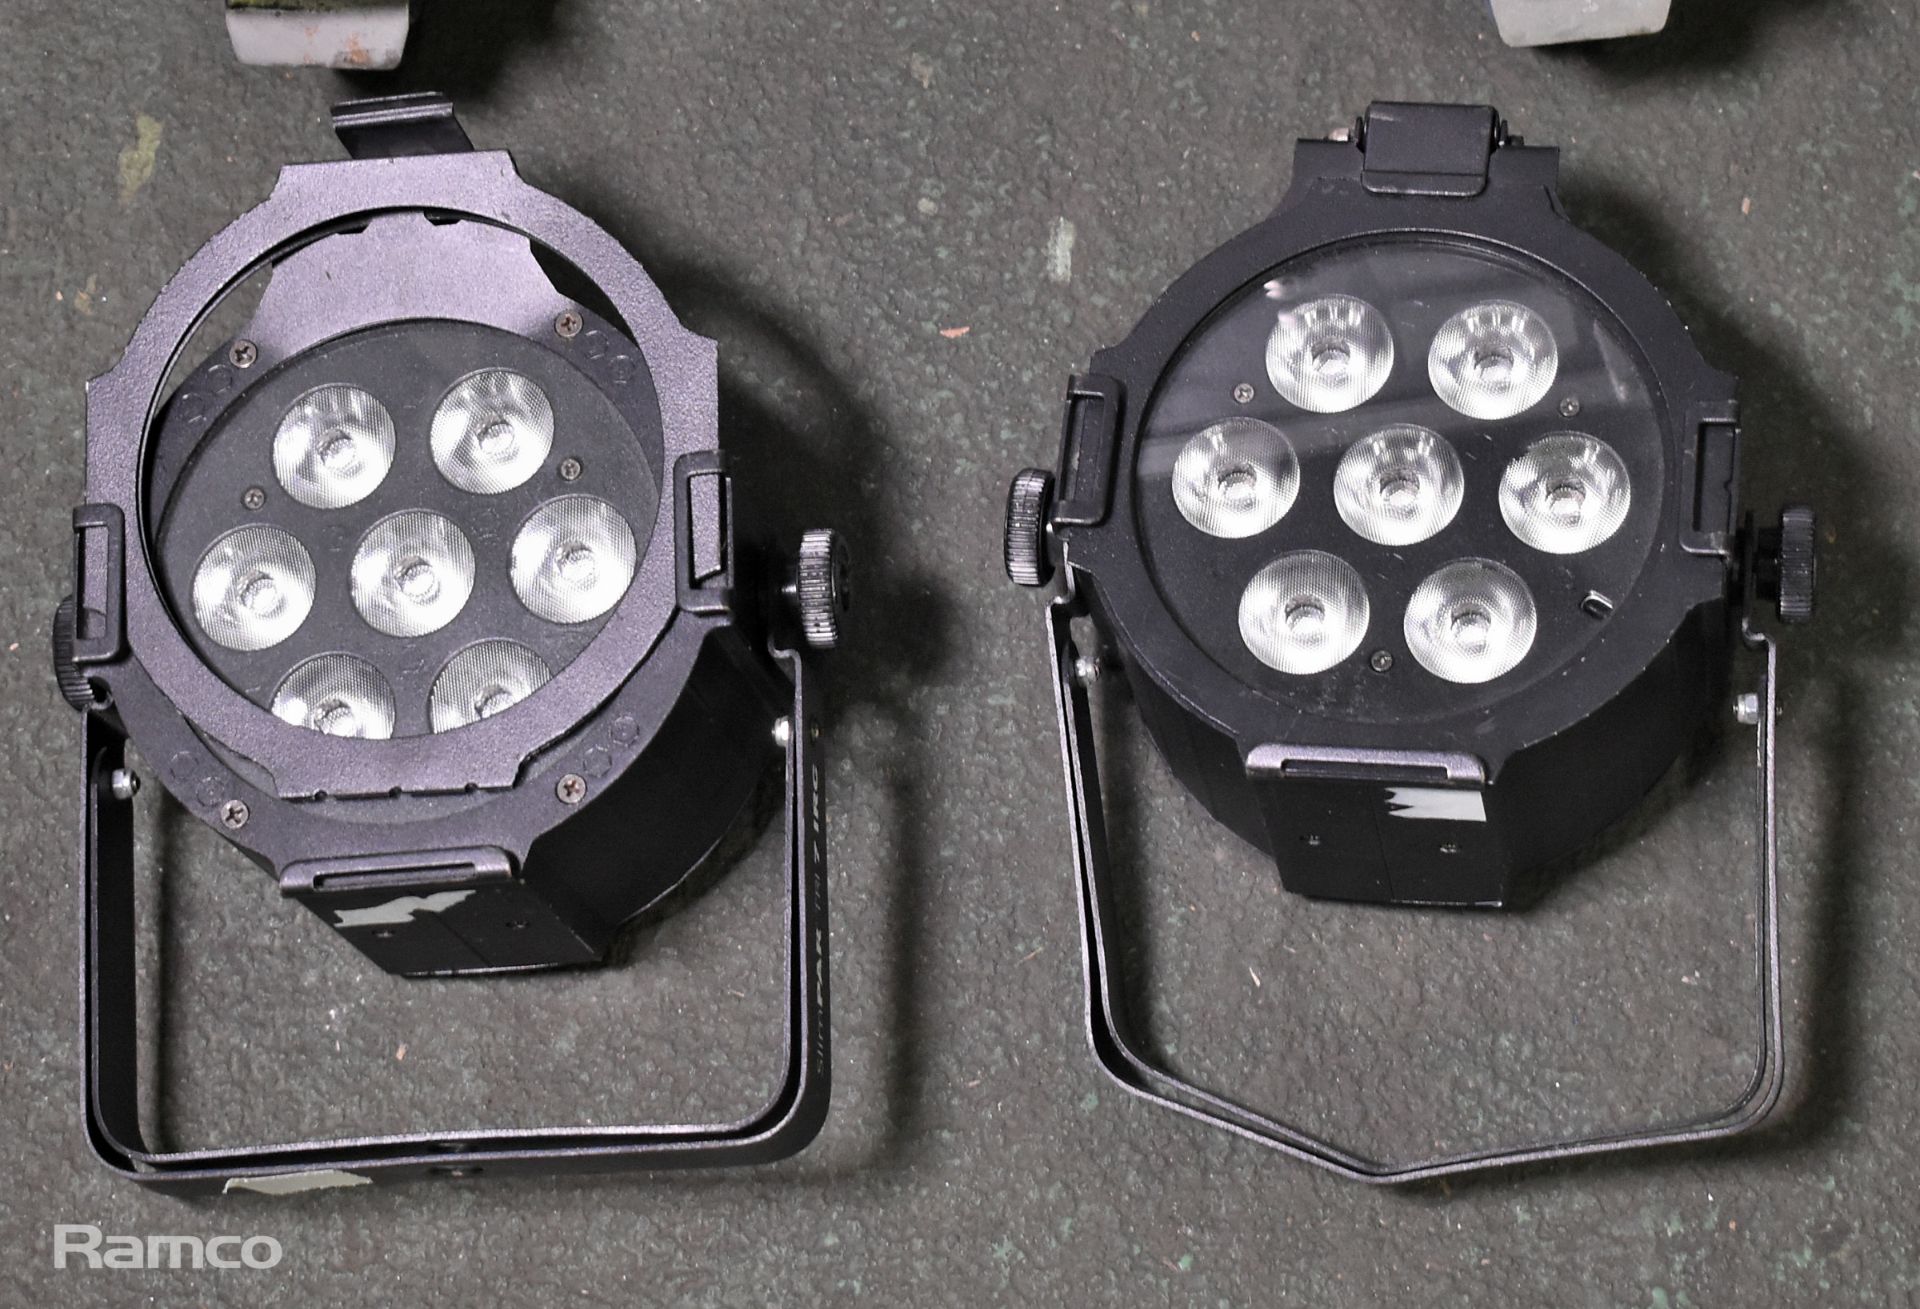 8x Chauvet LED SlimPar Tri7 IRC over 2 flight cases with power cables - Image 5 of 13